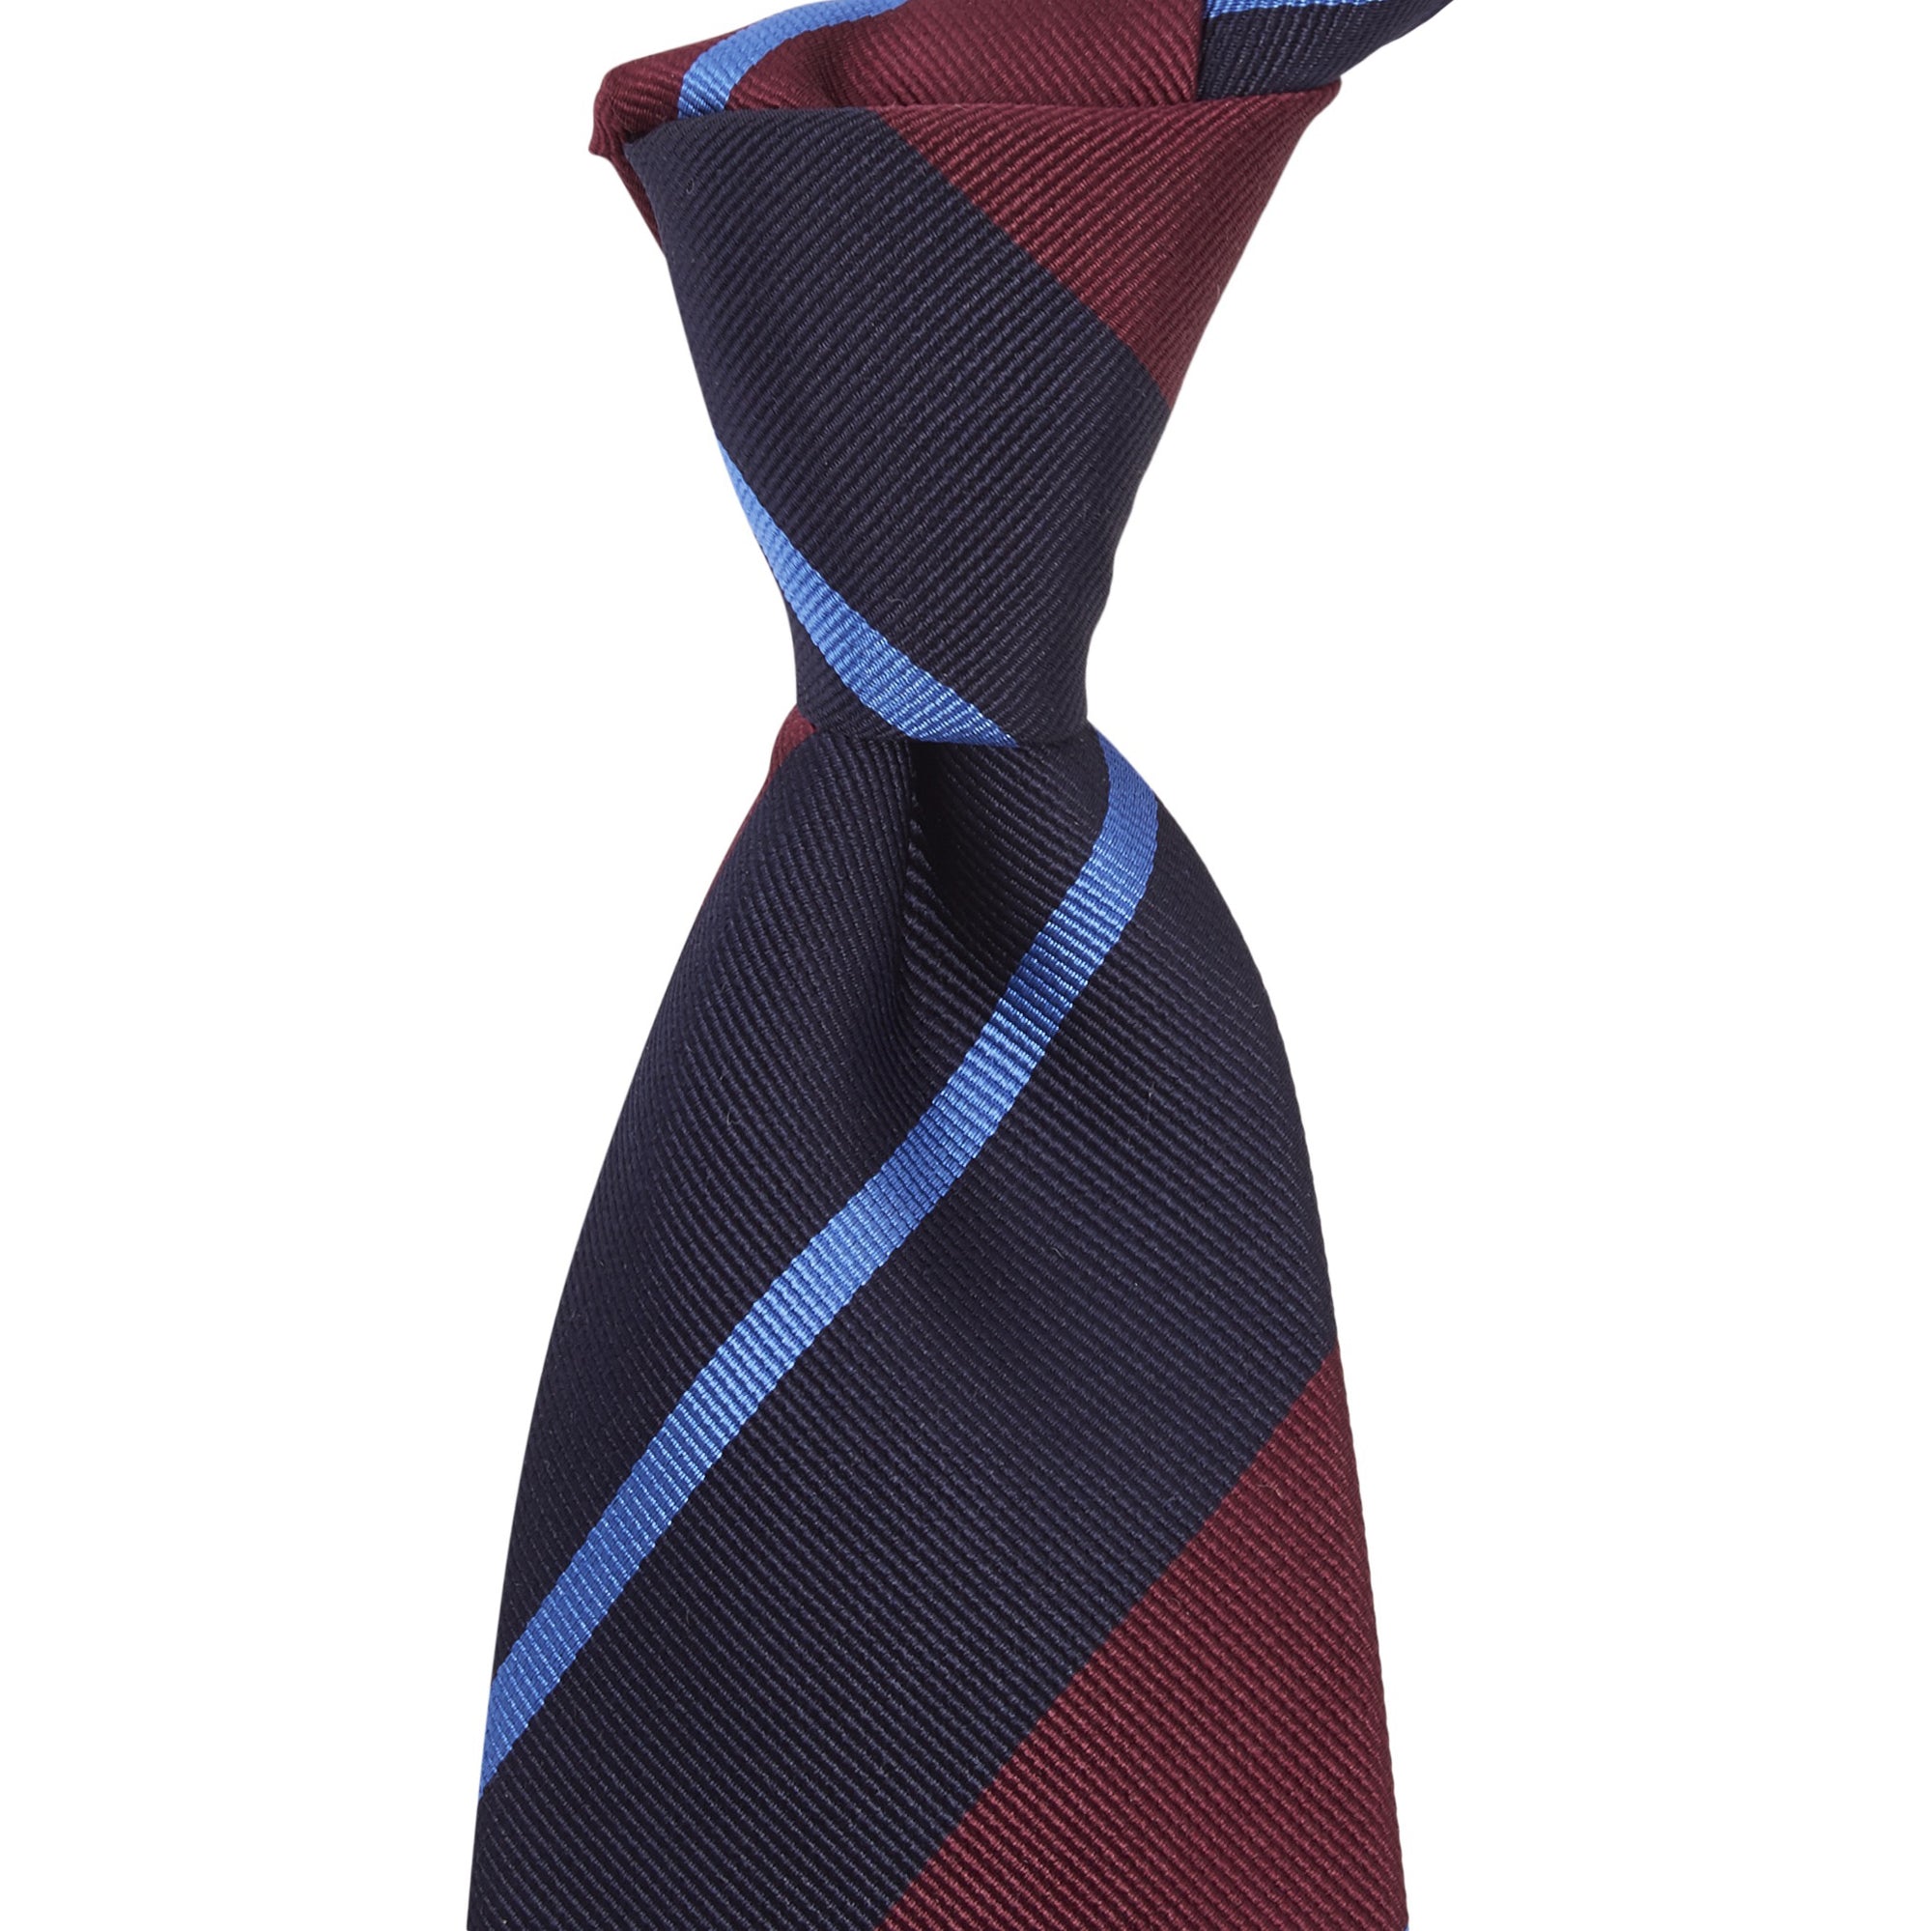 A quality Sovereign Grade Navy/Burgundy Rep Tie with handmade blue and red stripes on a white background from KirbyAllison.com in the United Kingdom.